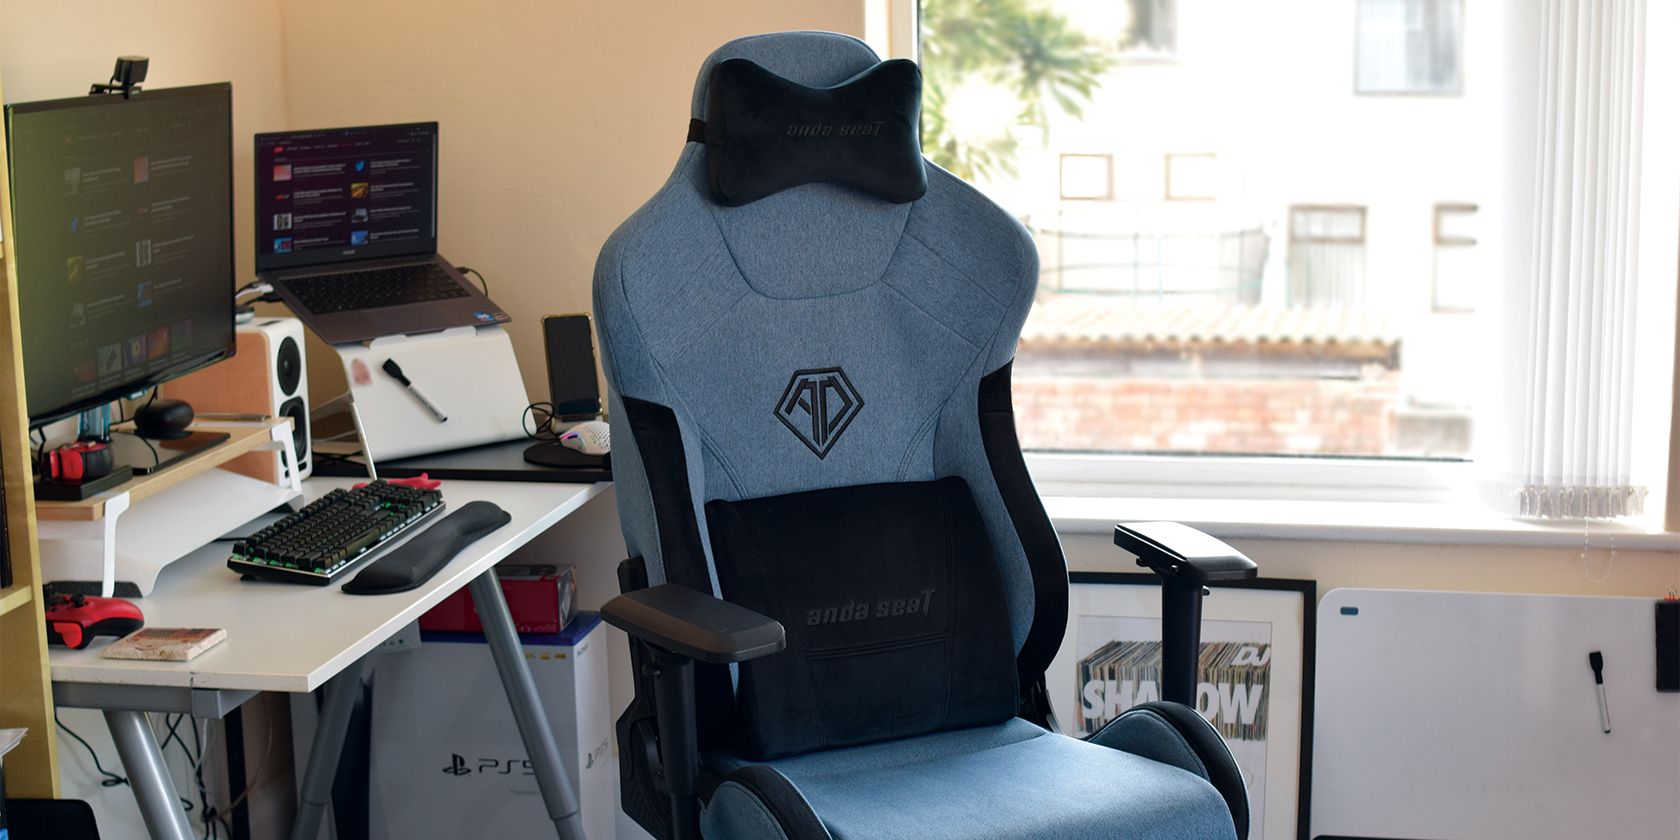 AndaSeat T-Pro 2 Review: A Fitting Throne for the Fuller Form